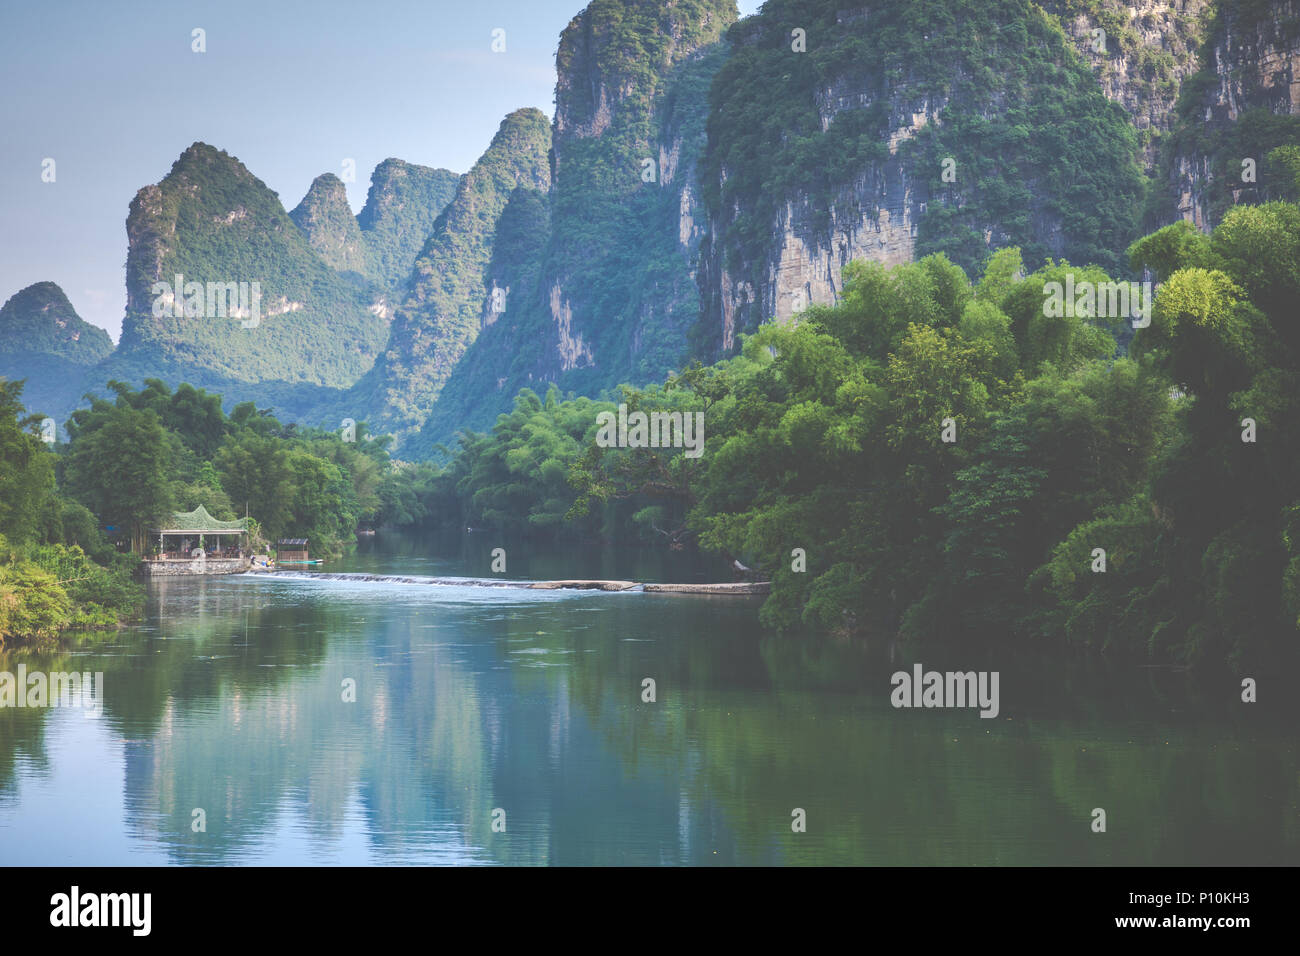 Scenic view of Yulong River among green woods and karst mountains at Yangshuo County of Guilin, China. Yangshuo is a popular tourist destination of As Stock Photo